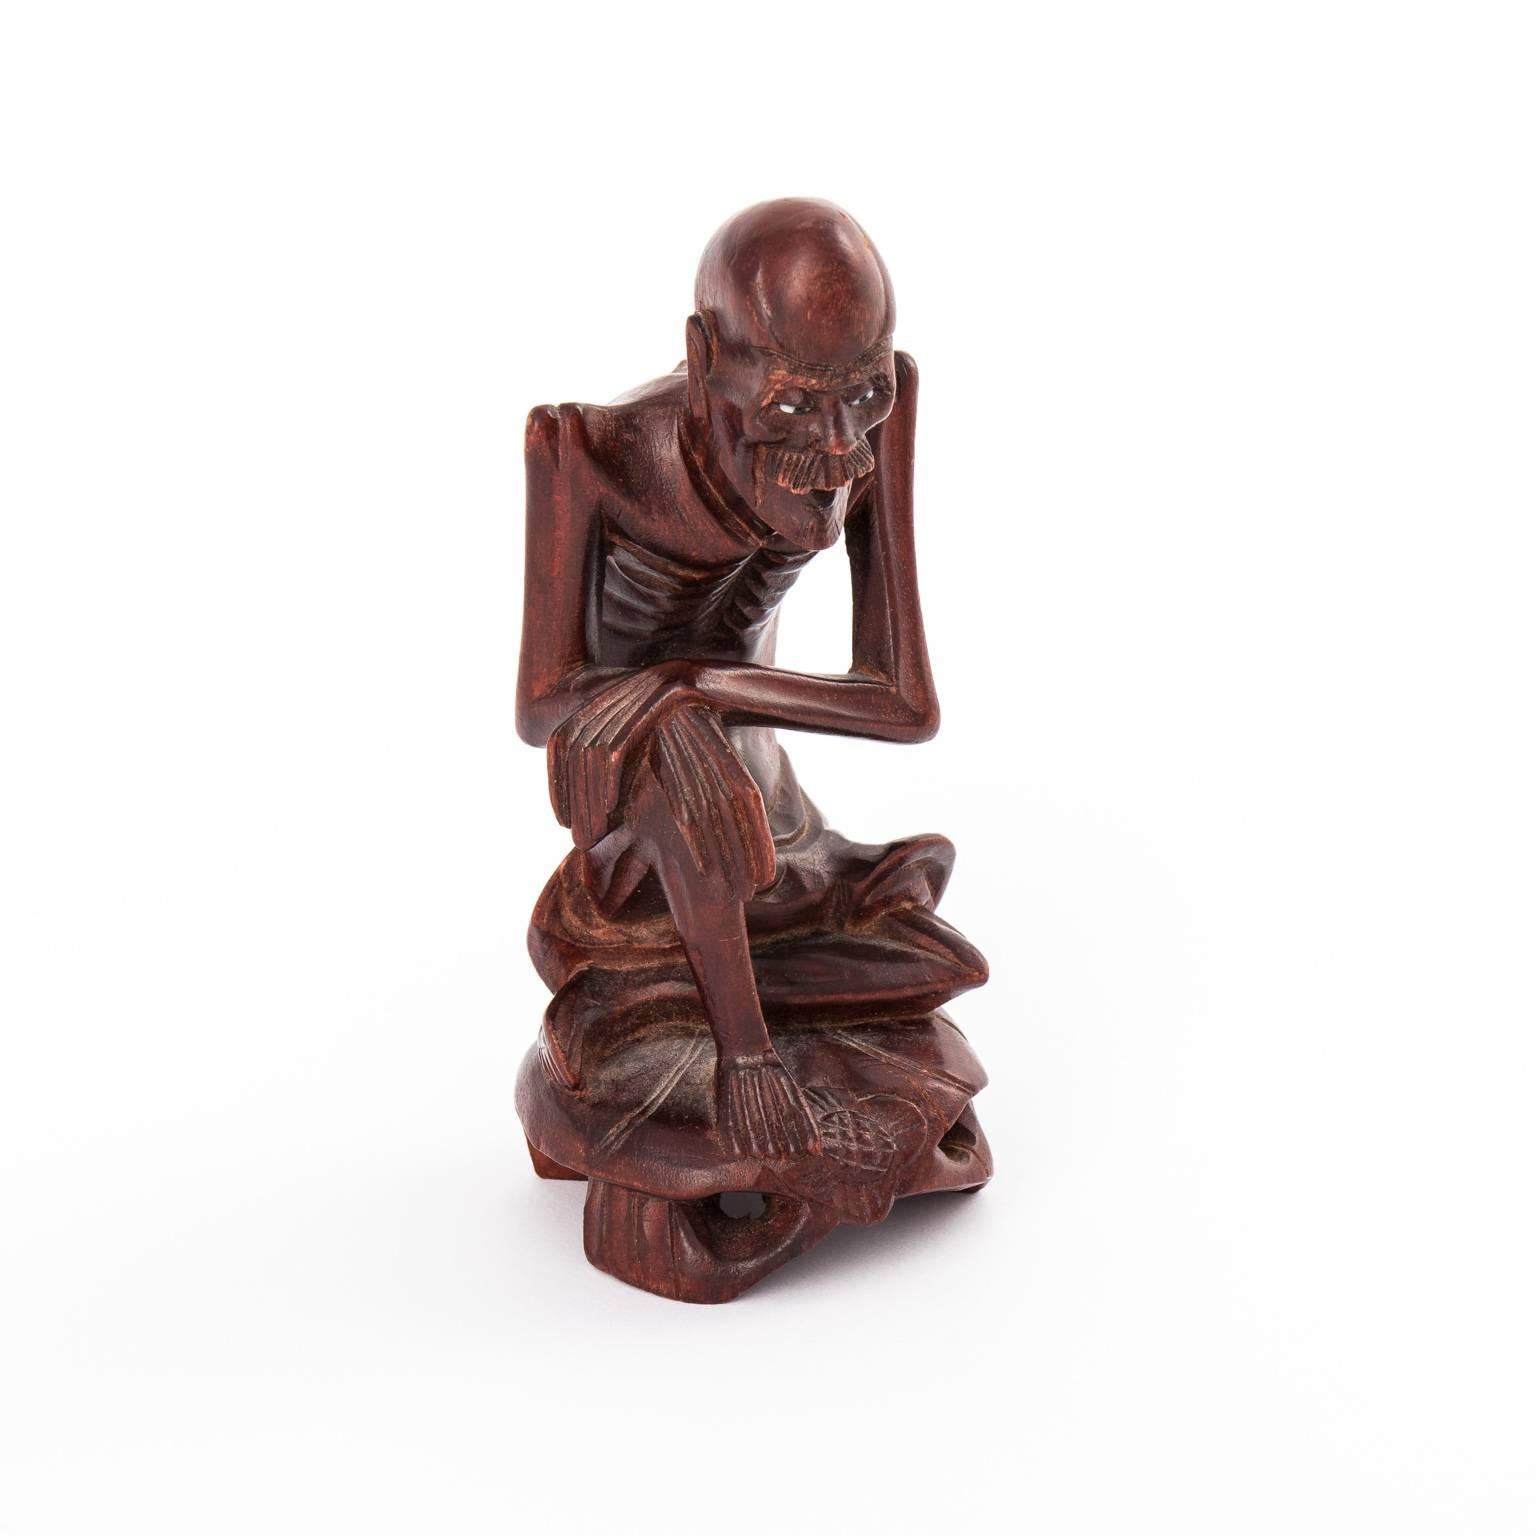 Wood carving of an old man, circa 19th century.
 